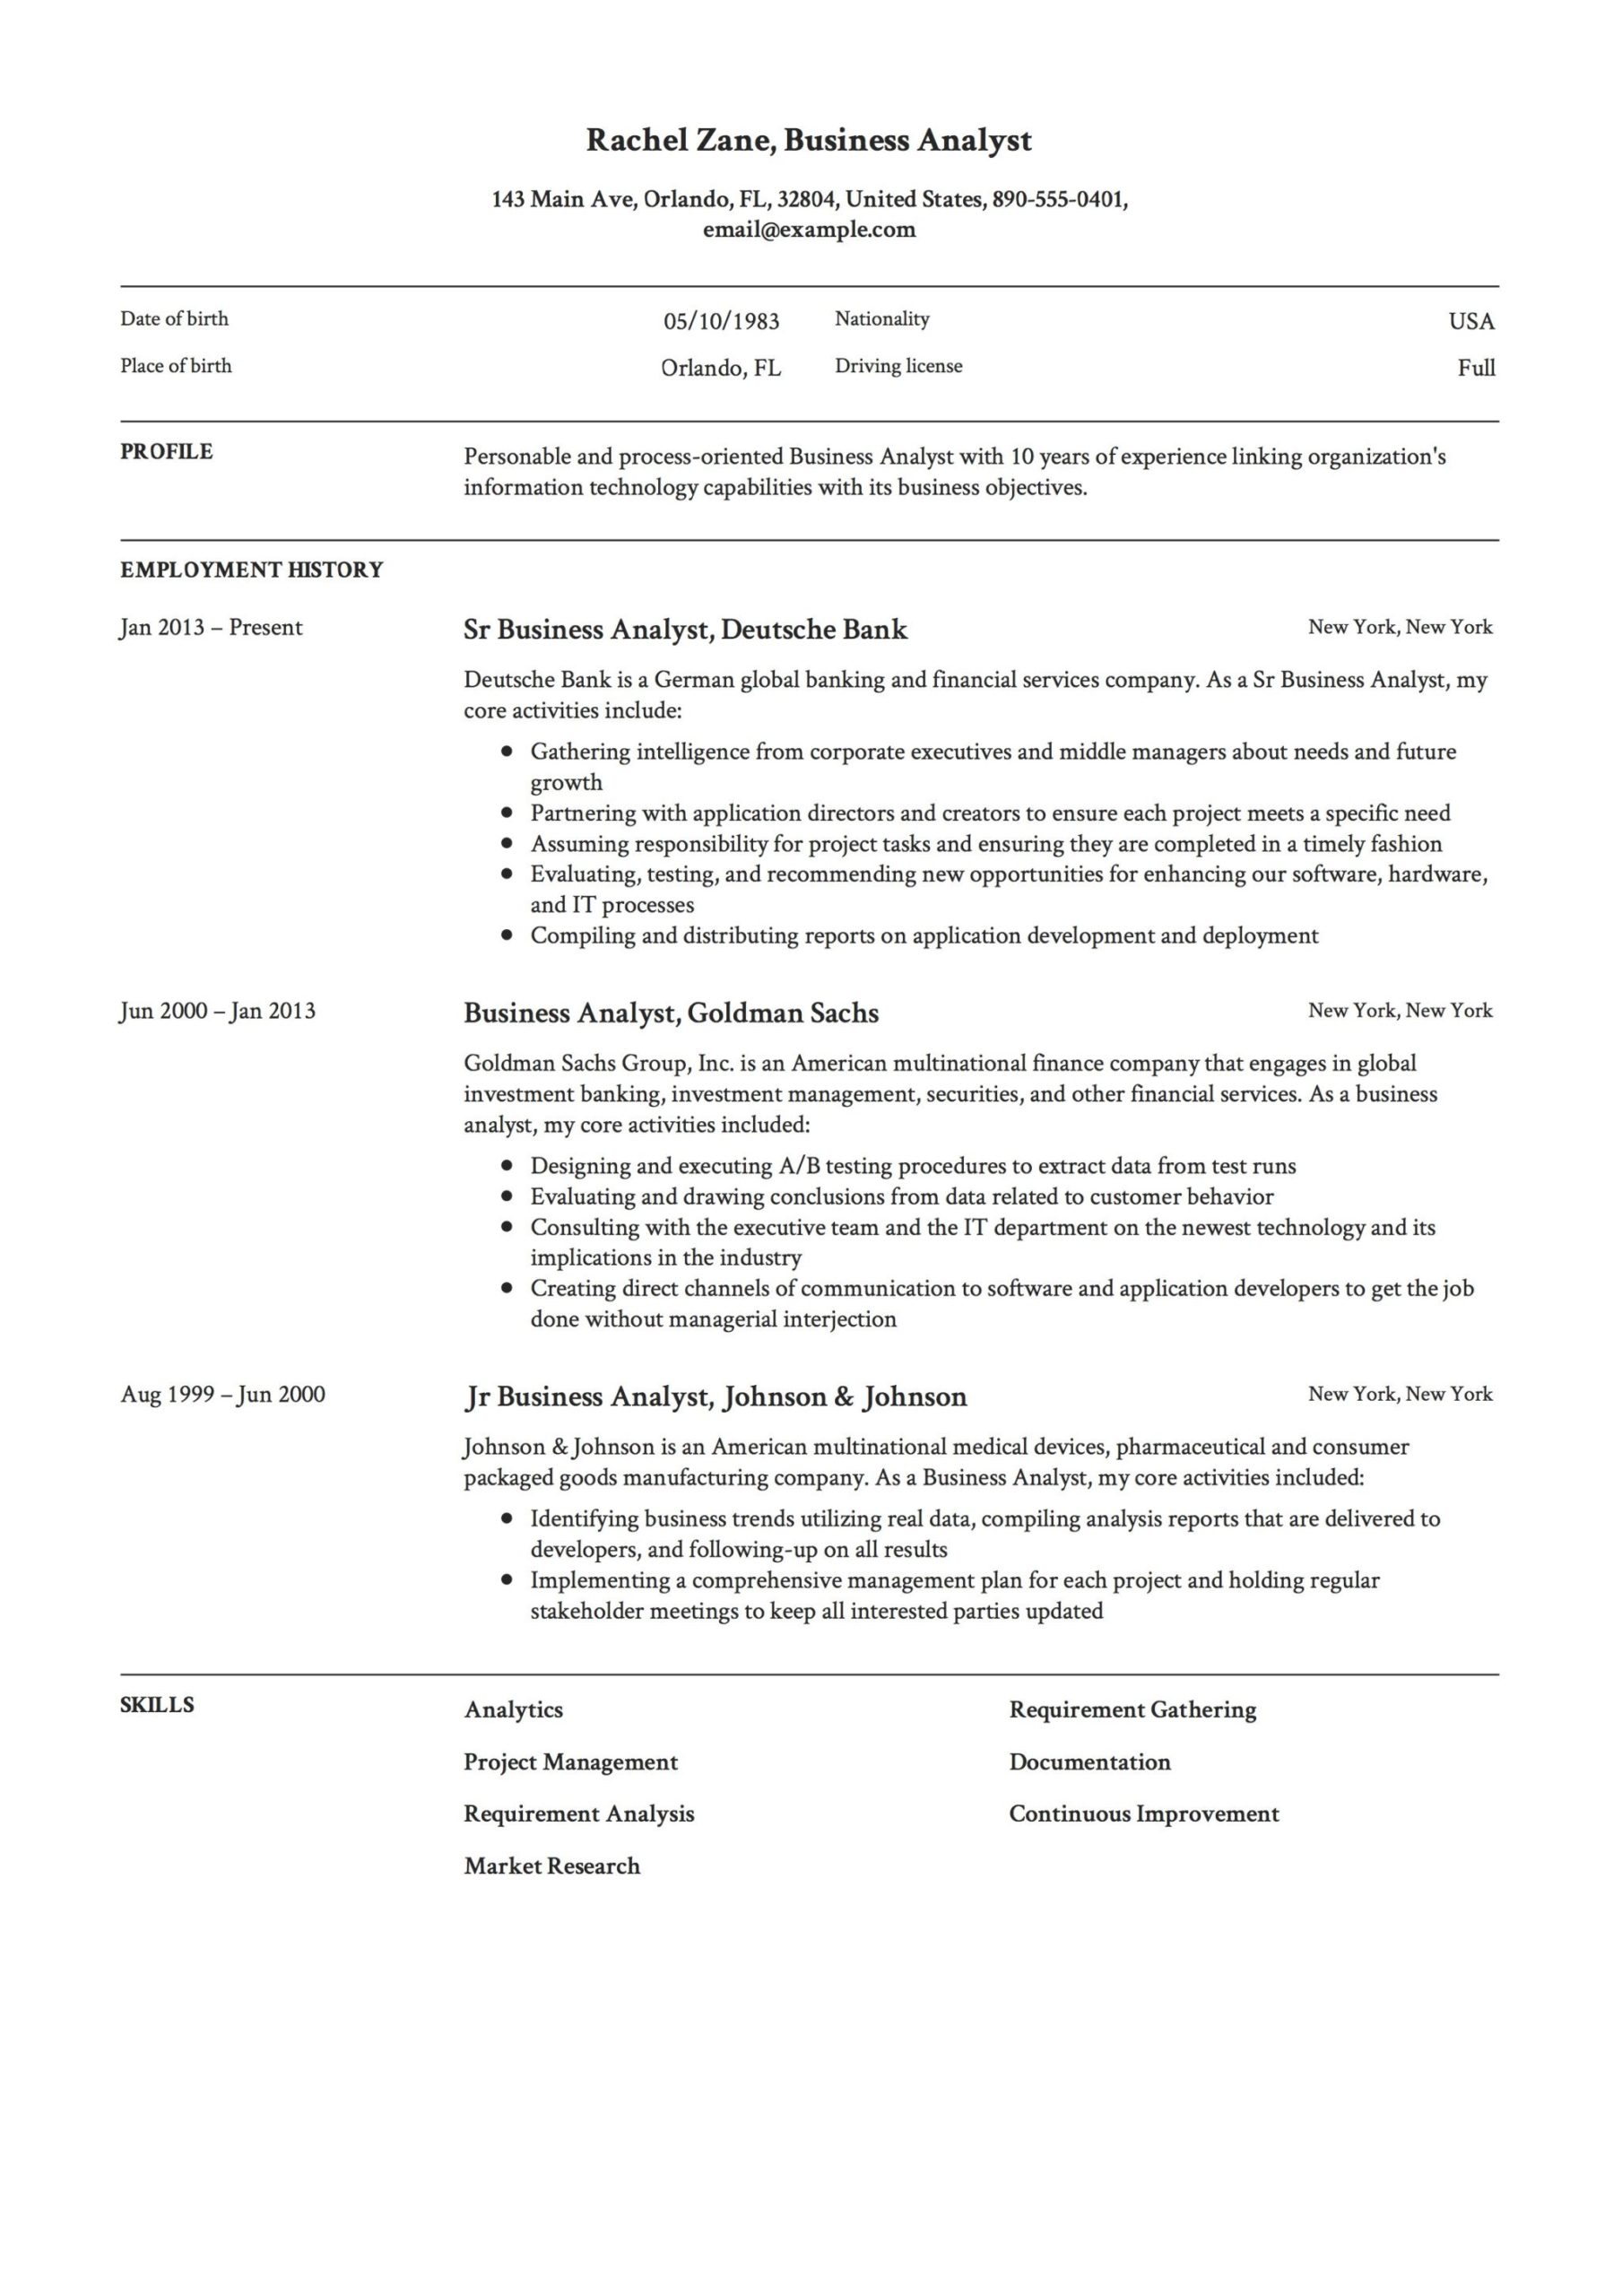 Business Analyst with Retail Experience Sample Resume Business Analyst Resume Examples & Writing Guide 2022